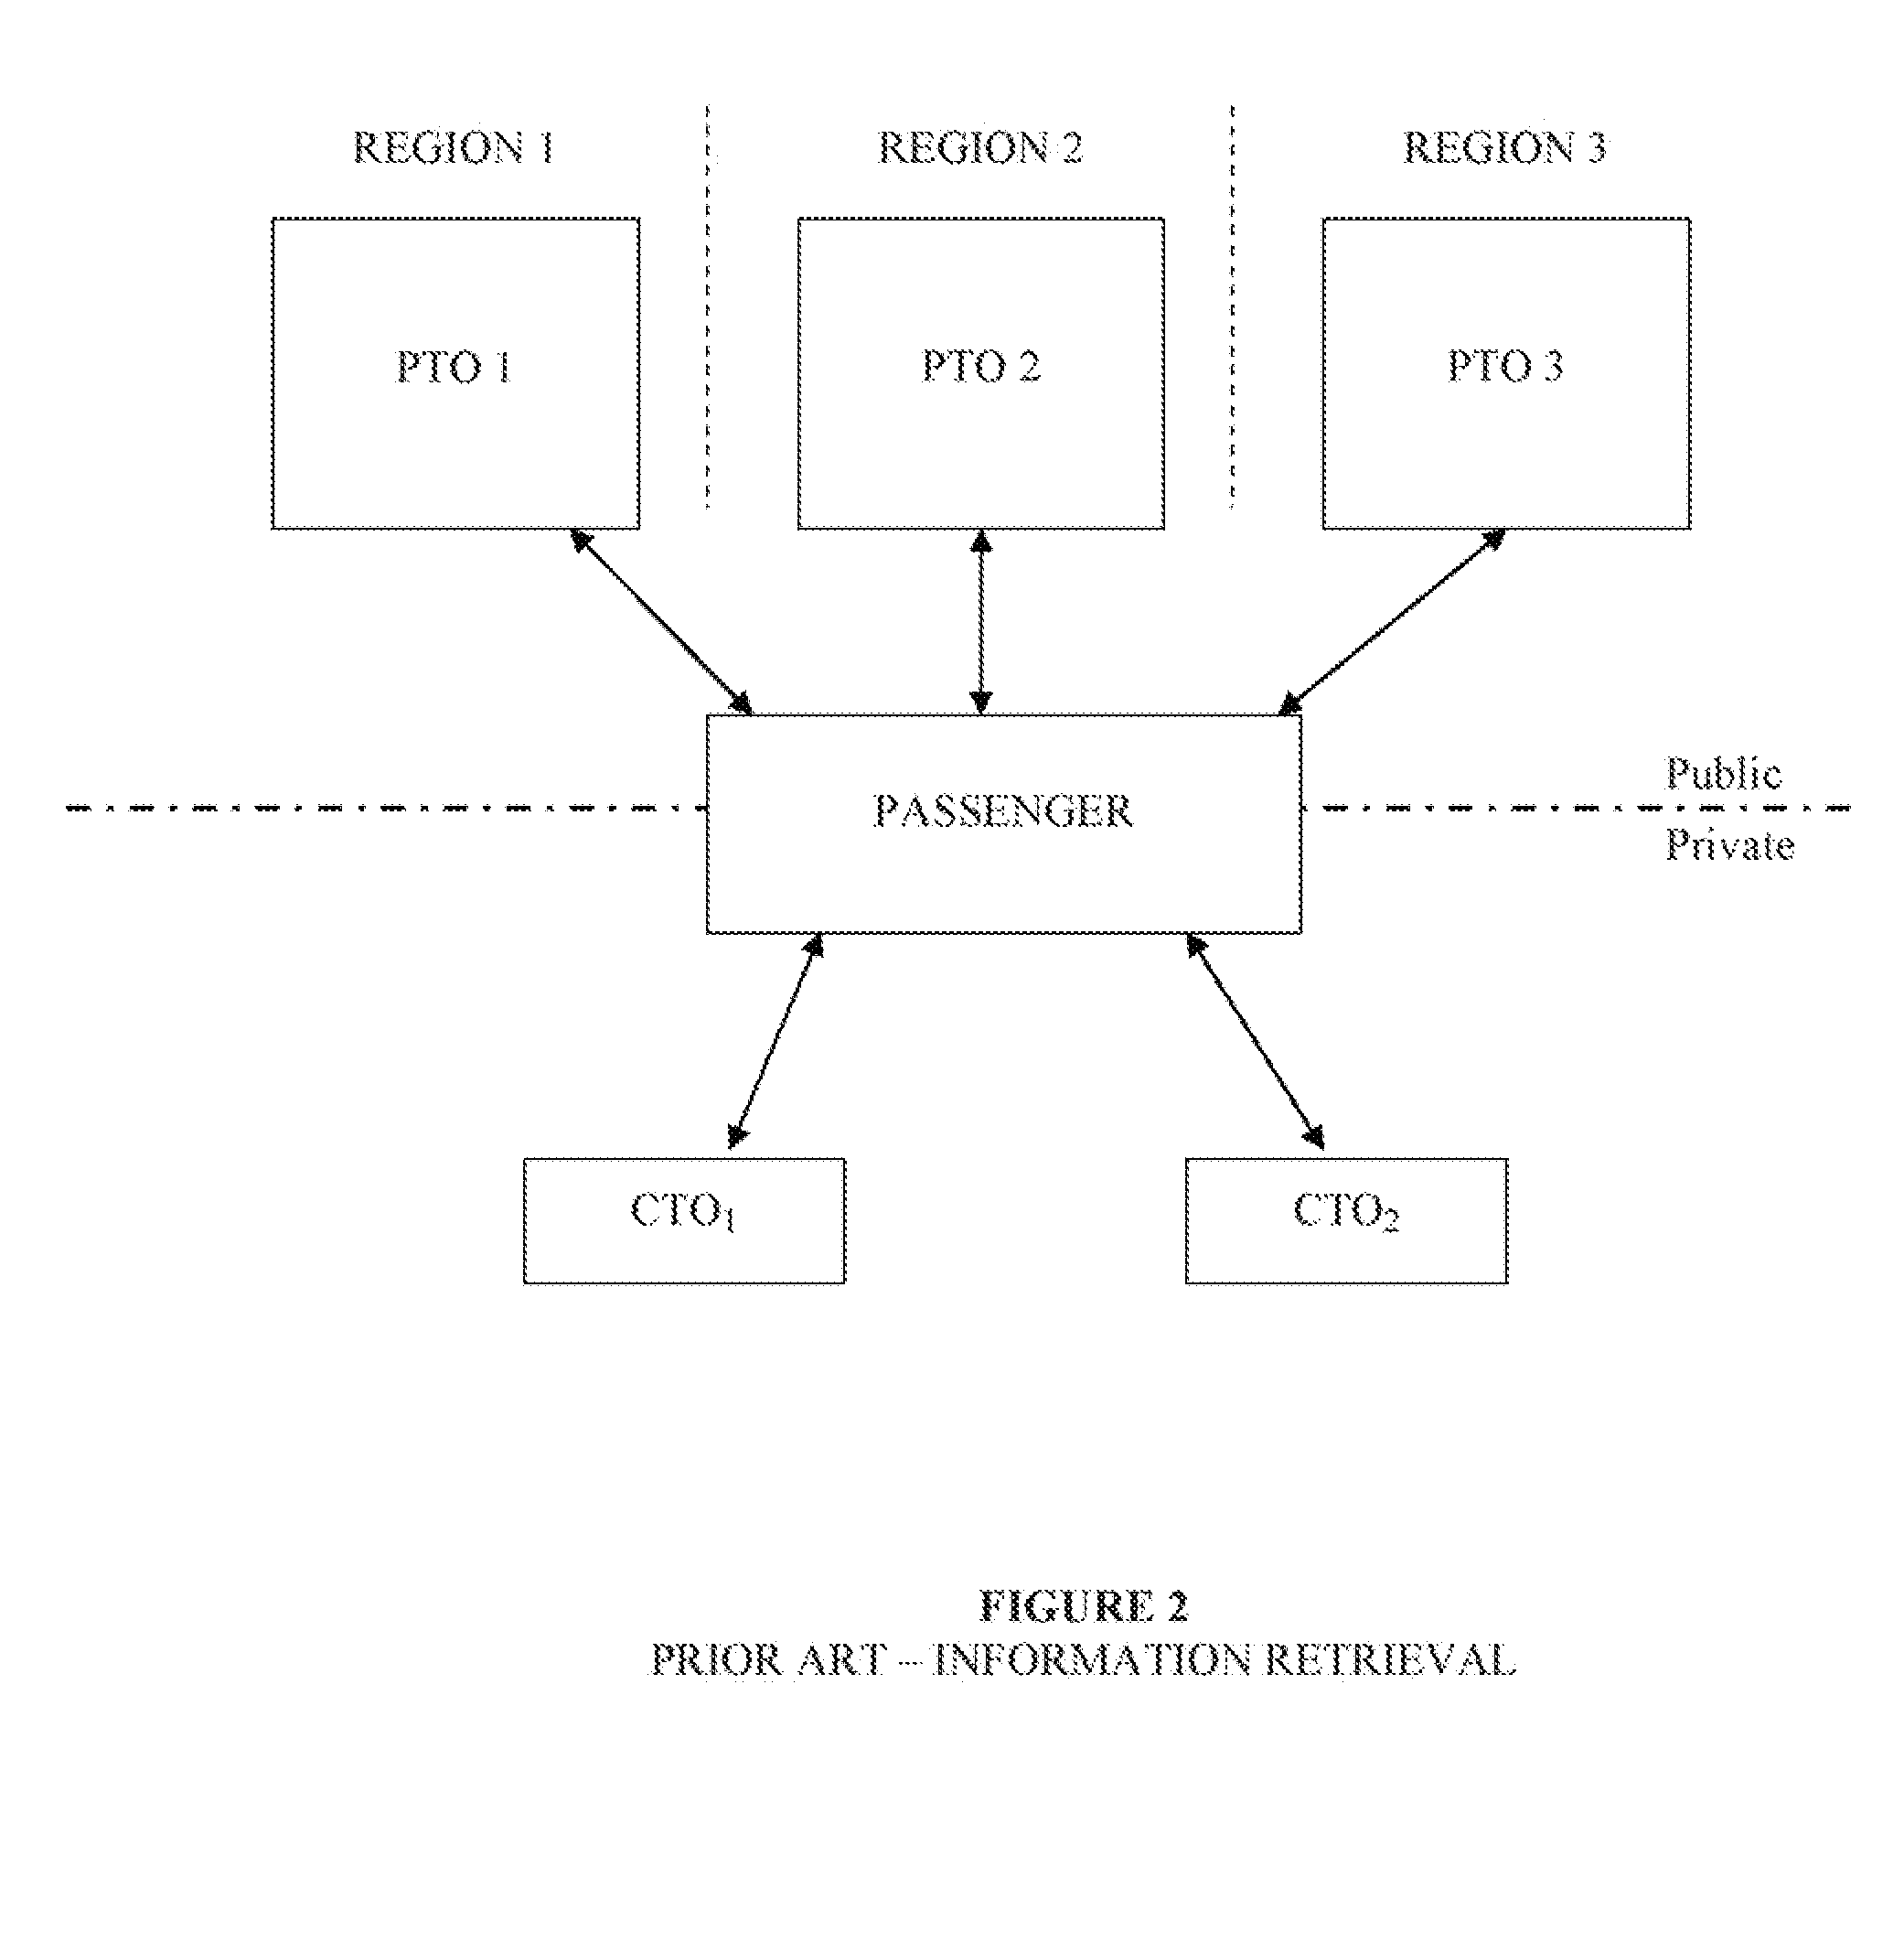 System and method for optimizing a transit network